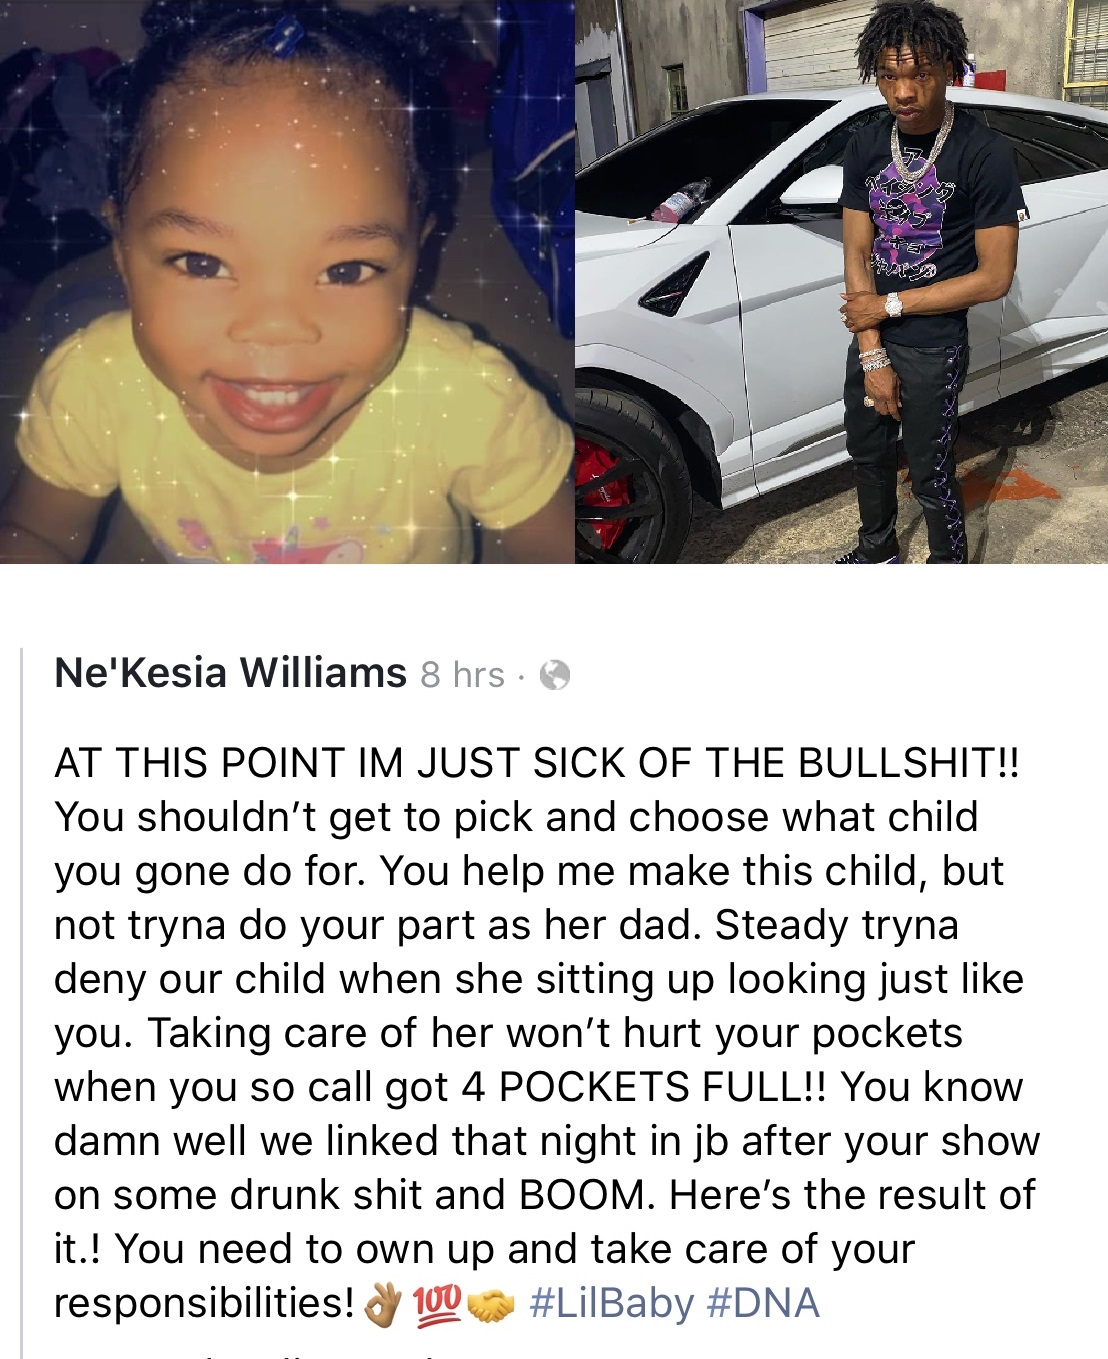 Ne'Kesia Williams has accused Lil Baby of being the father of her daughter. She claims Baby got her pregnant, backstage at one of his concerts. She is now saying he picks and chooses which child to be there for, ignoring the child they share, saying her daughter looks just like him.